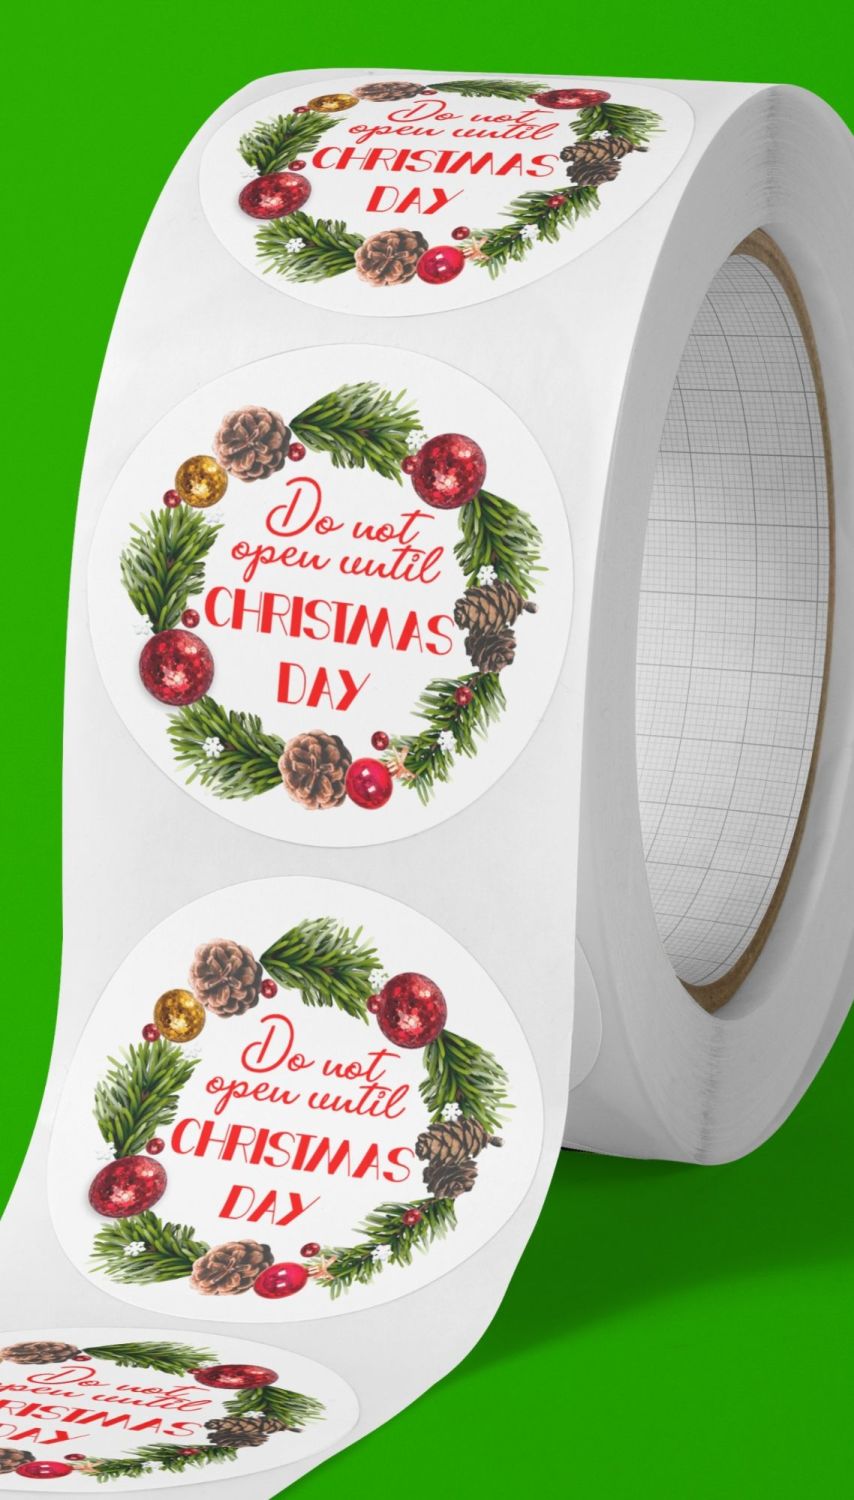 Do not open until Christmas round stickers. Wreath frame 